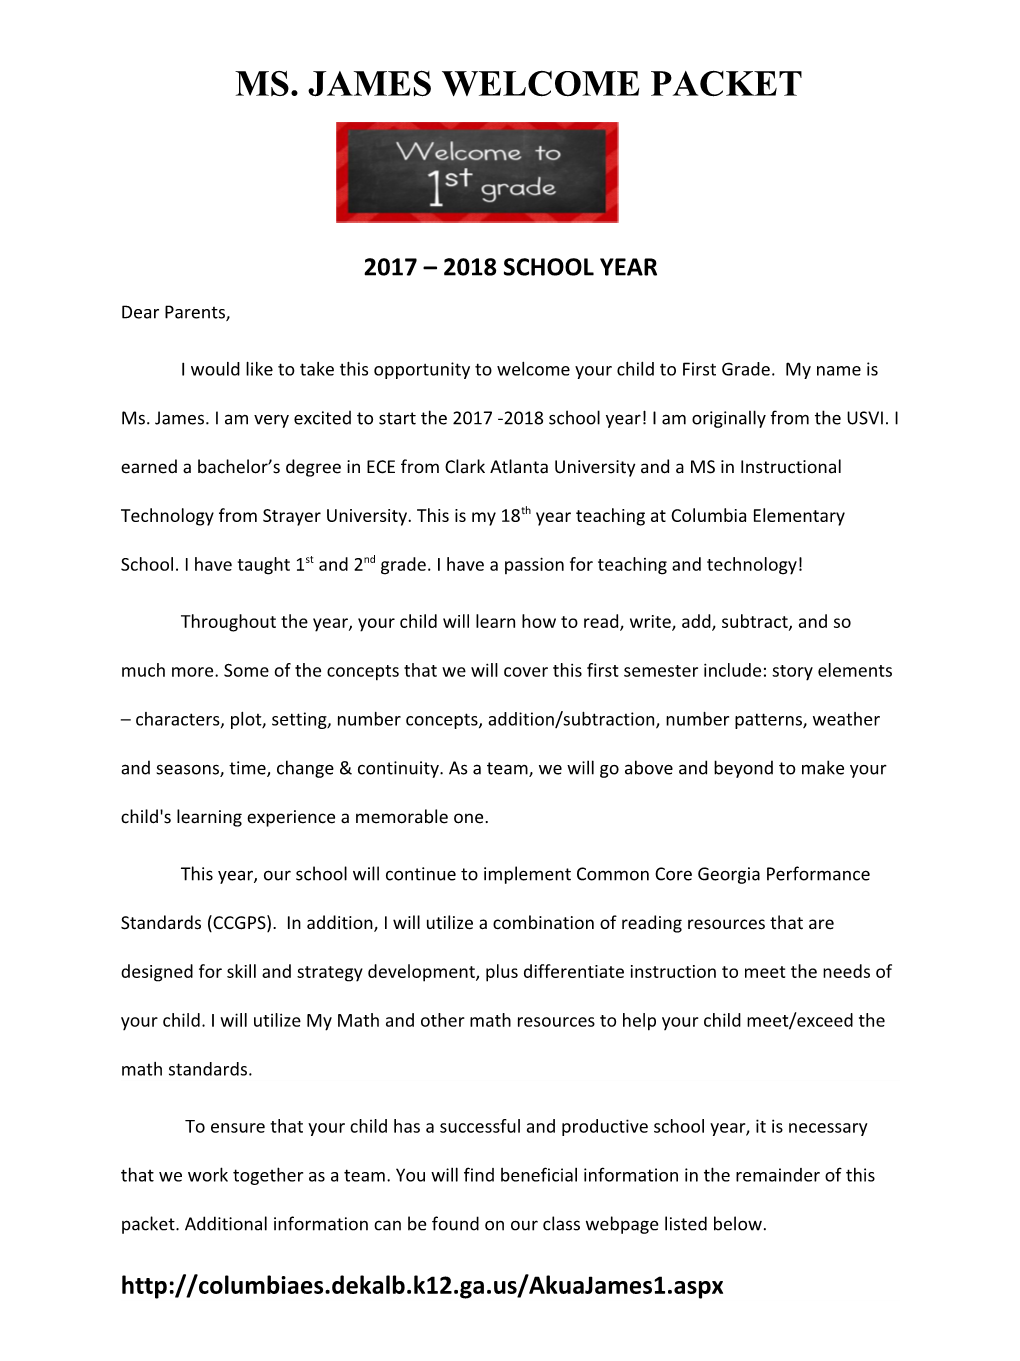 Ms. James Welcome Packet